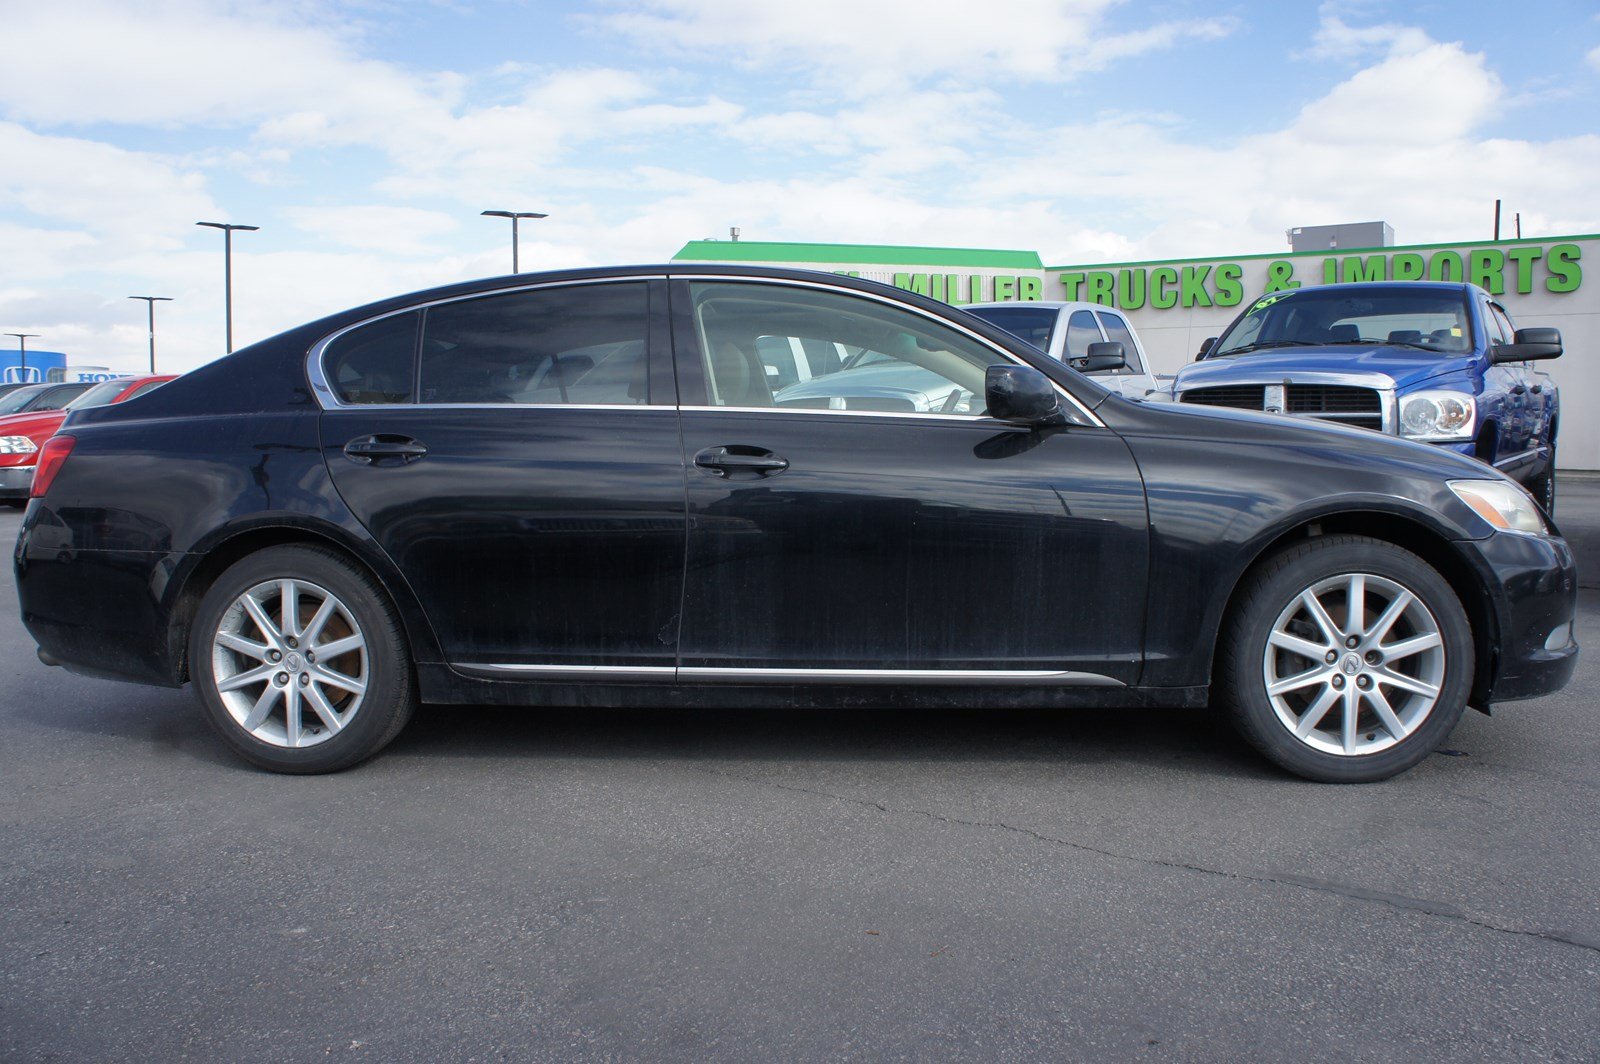 PreOwned 2006 Lexus GS 300 300 4dr Car in Sandy S7586A